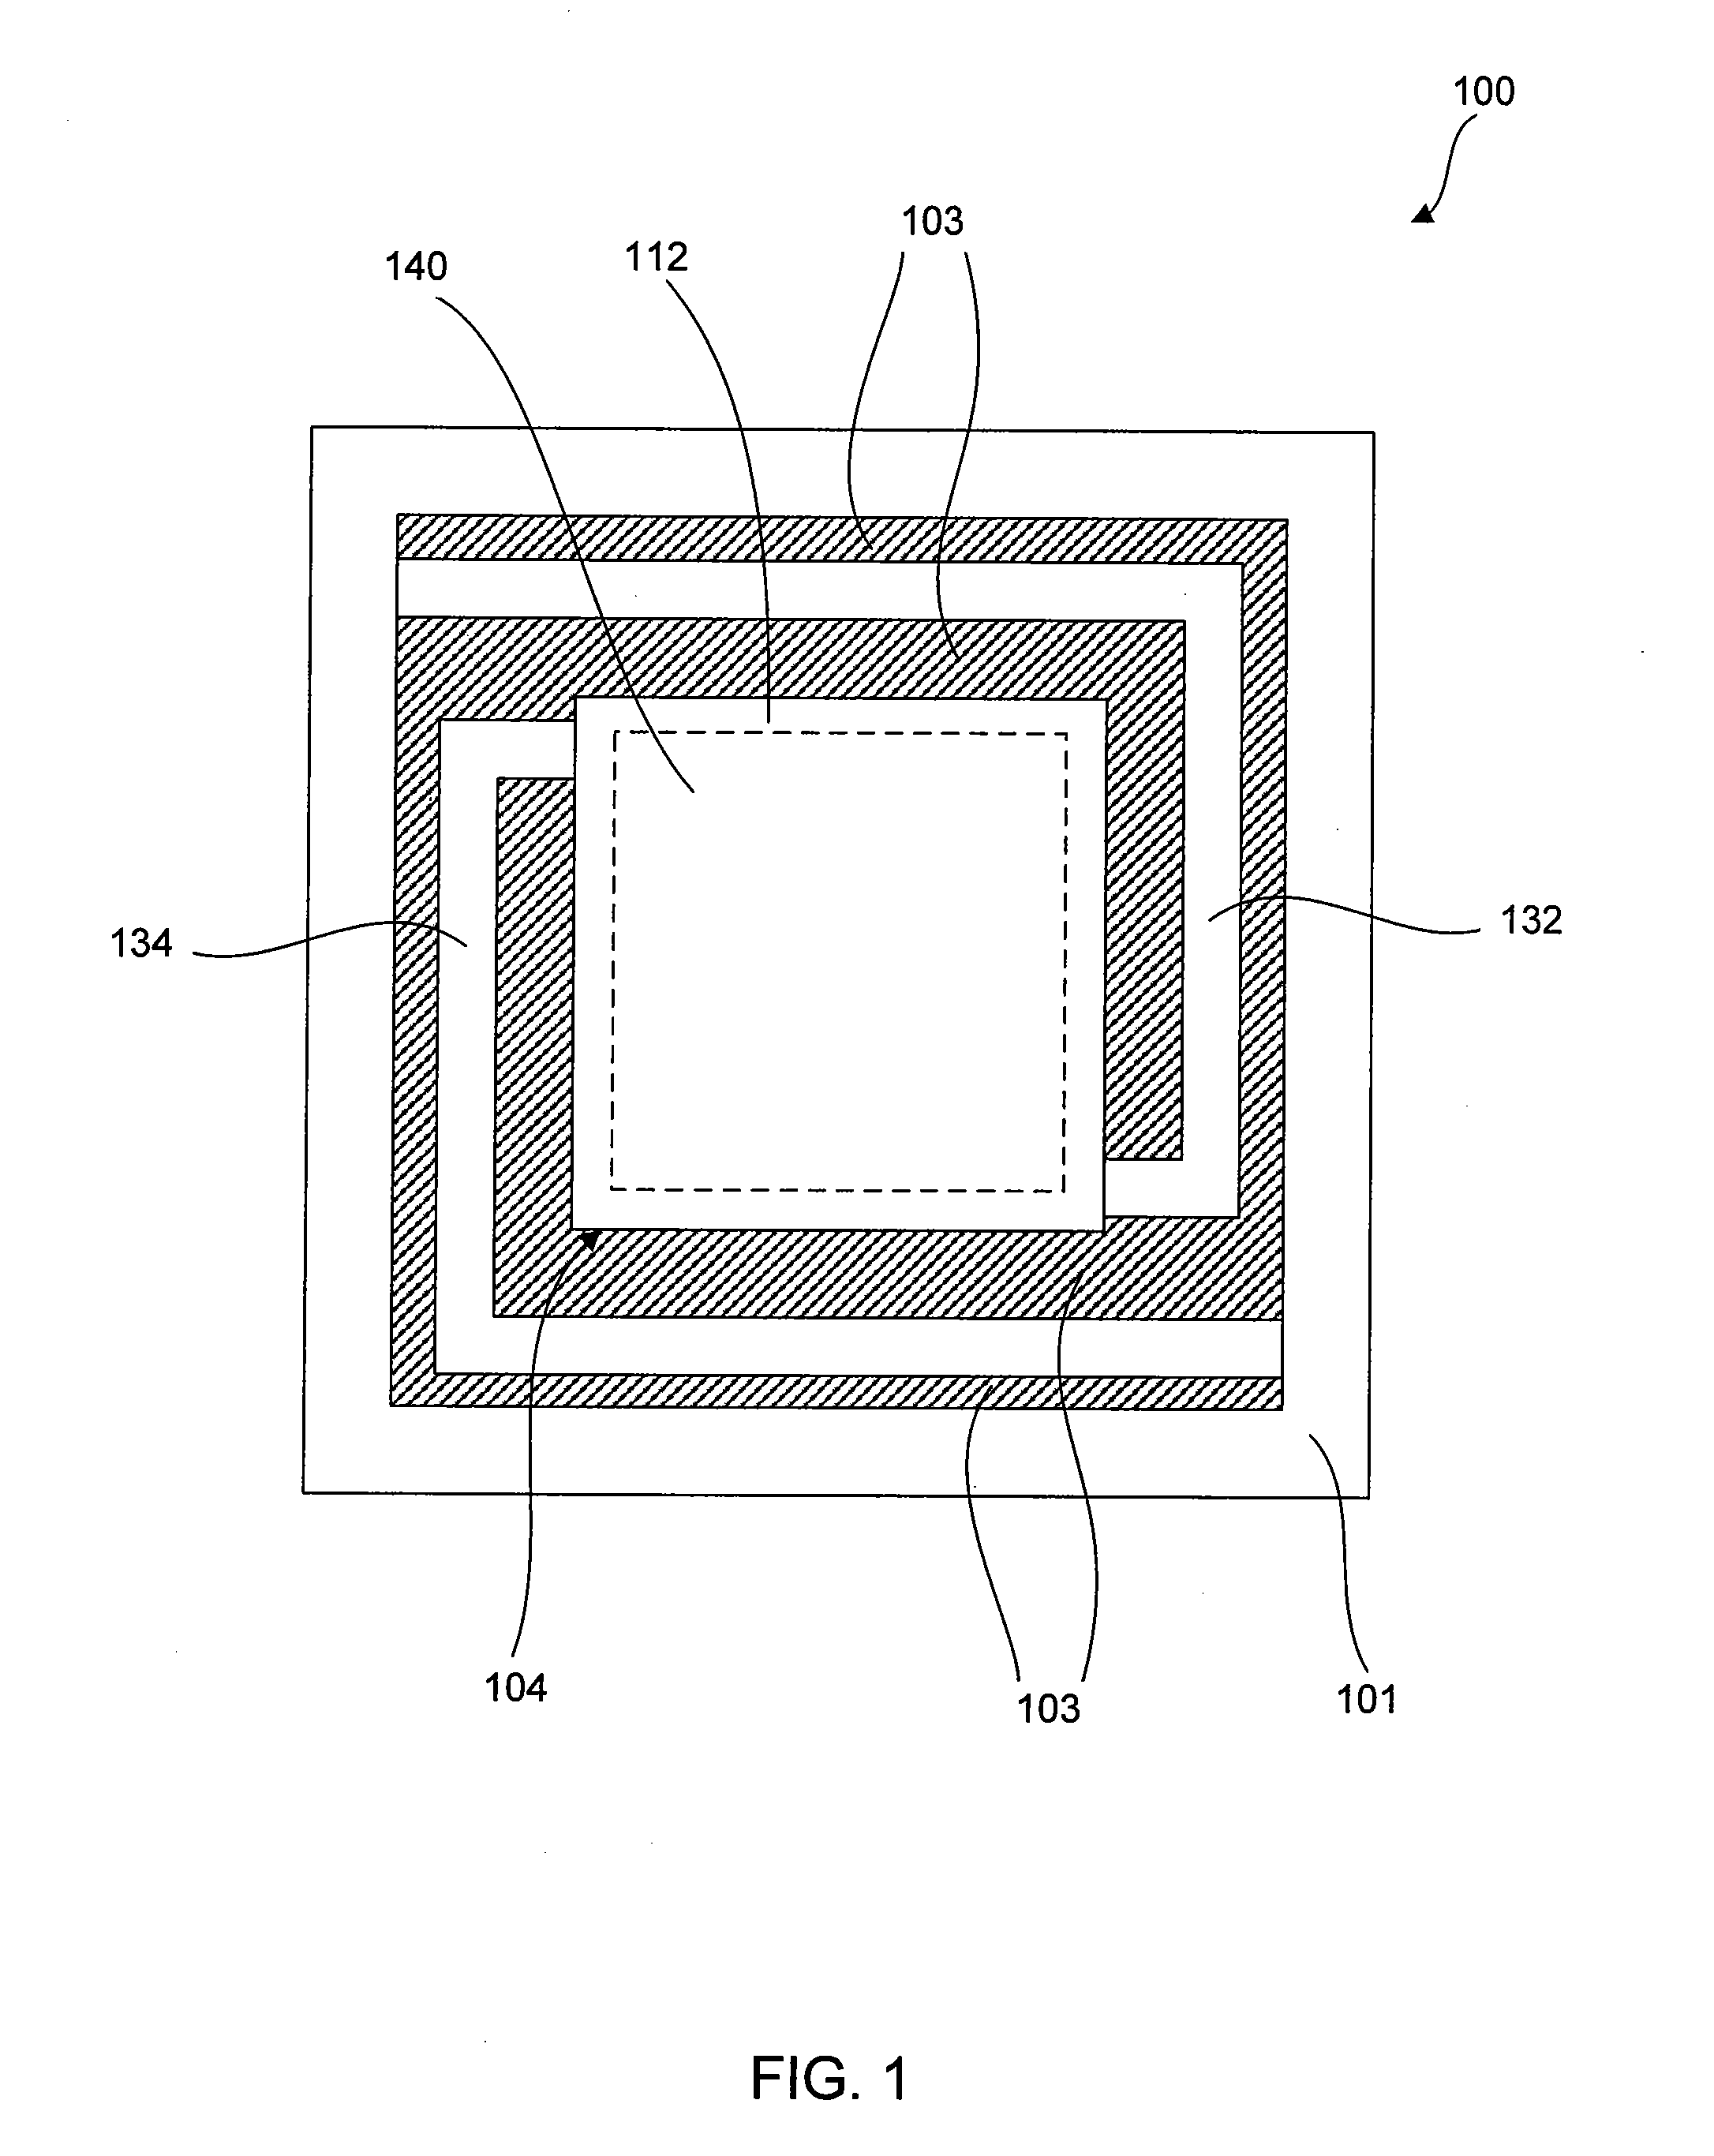 Uncooled infrared detector and methods for manufacturing the same